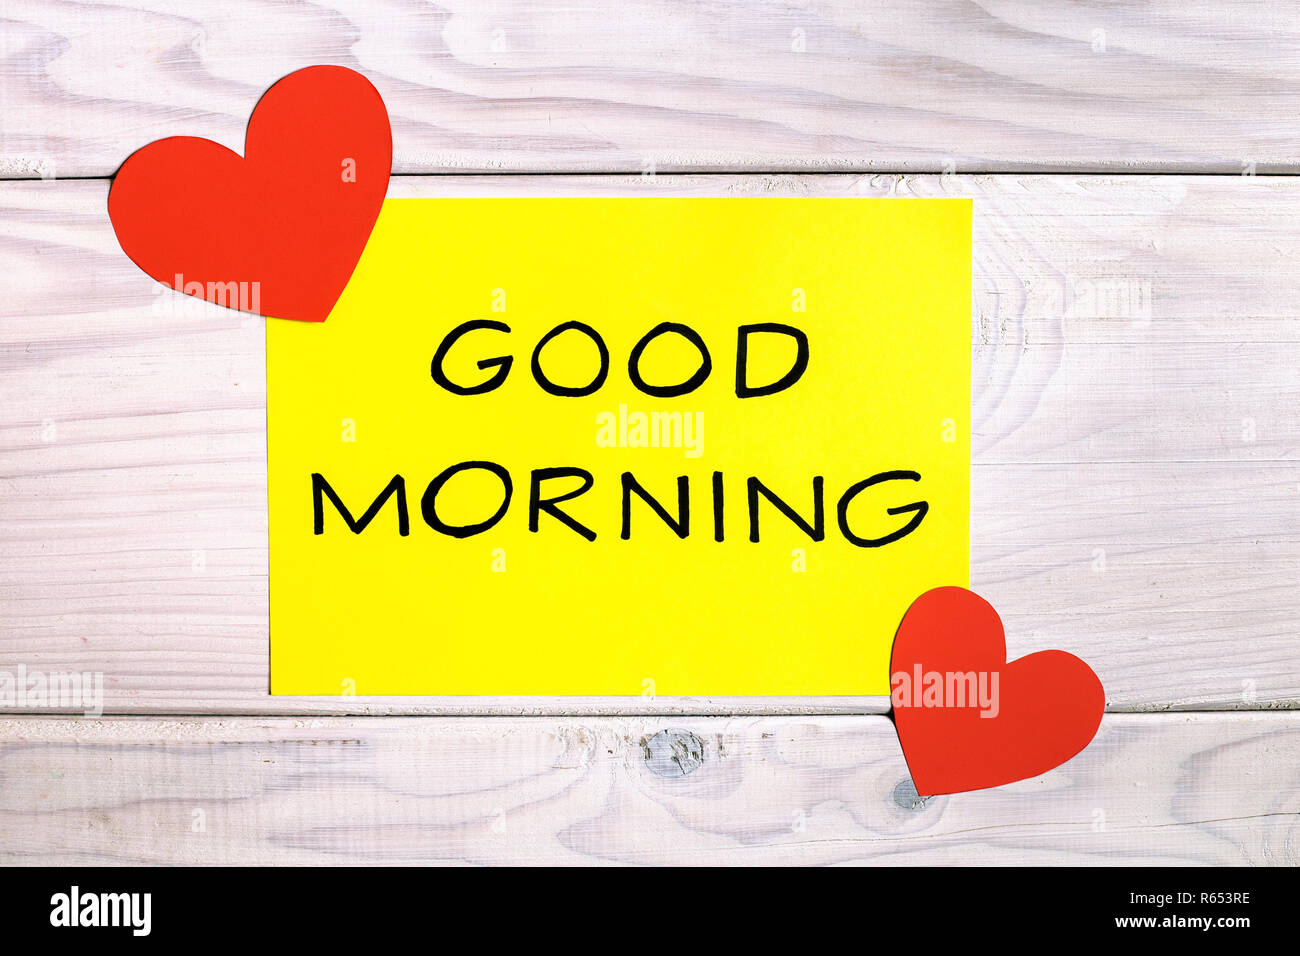 Text good morning with heart shapes on wooden table Stock Photo ...